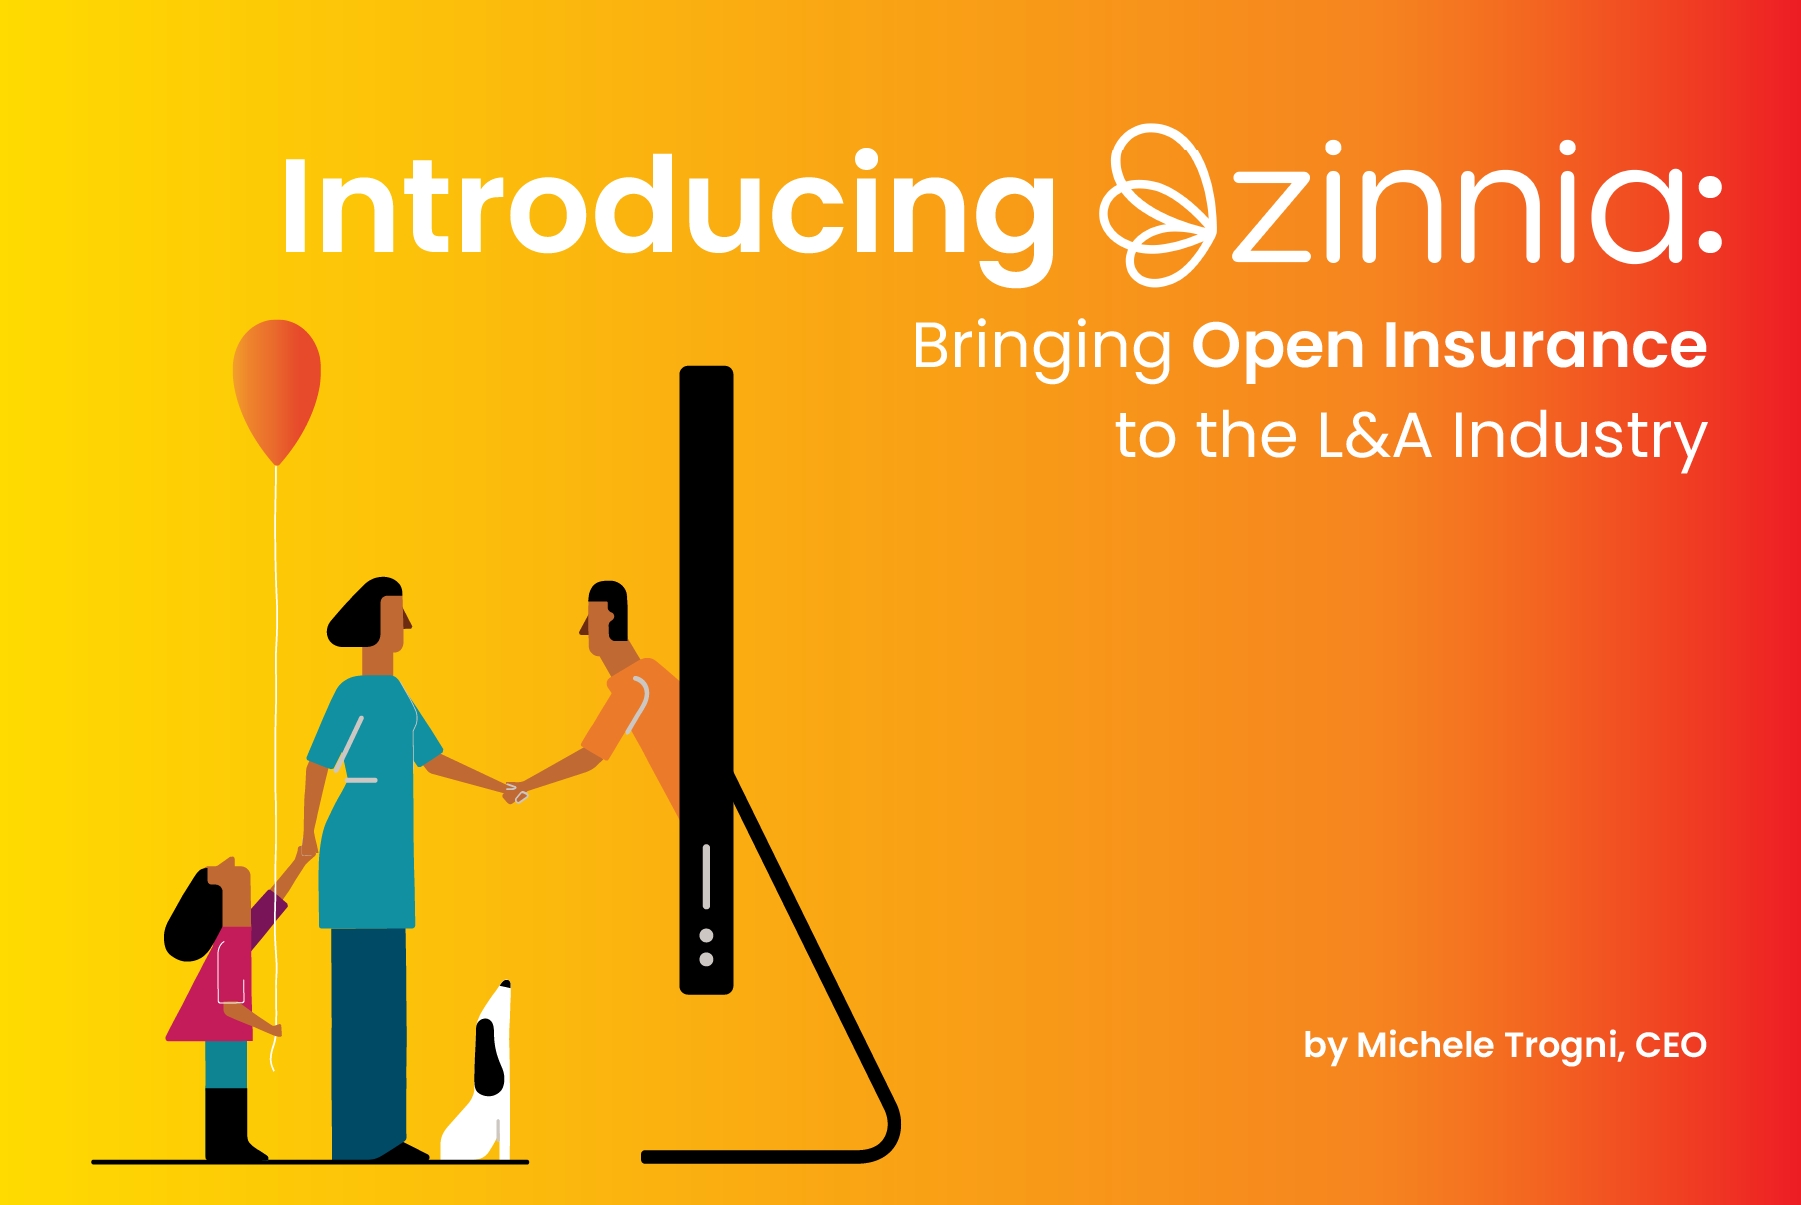 Introducing Zinnia: Bringing Open Insurance to the L&A Industry